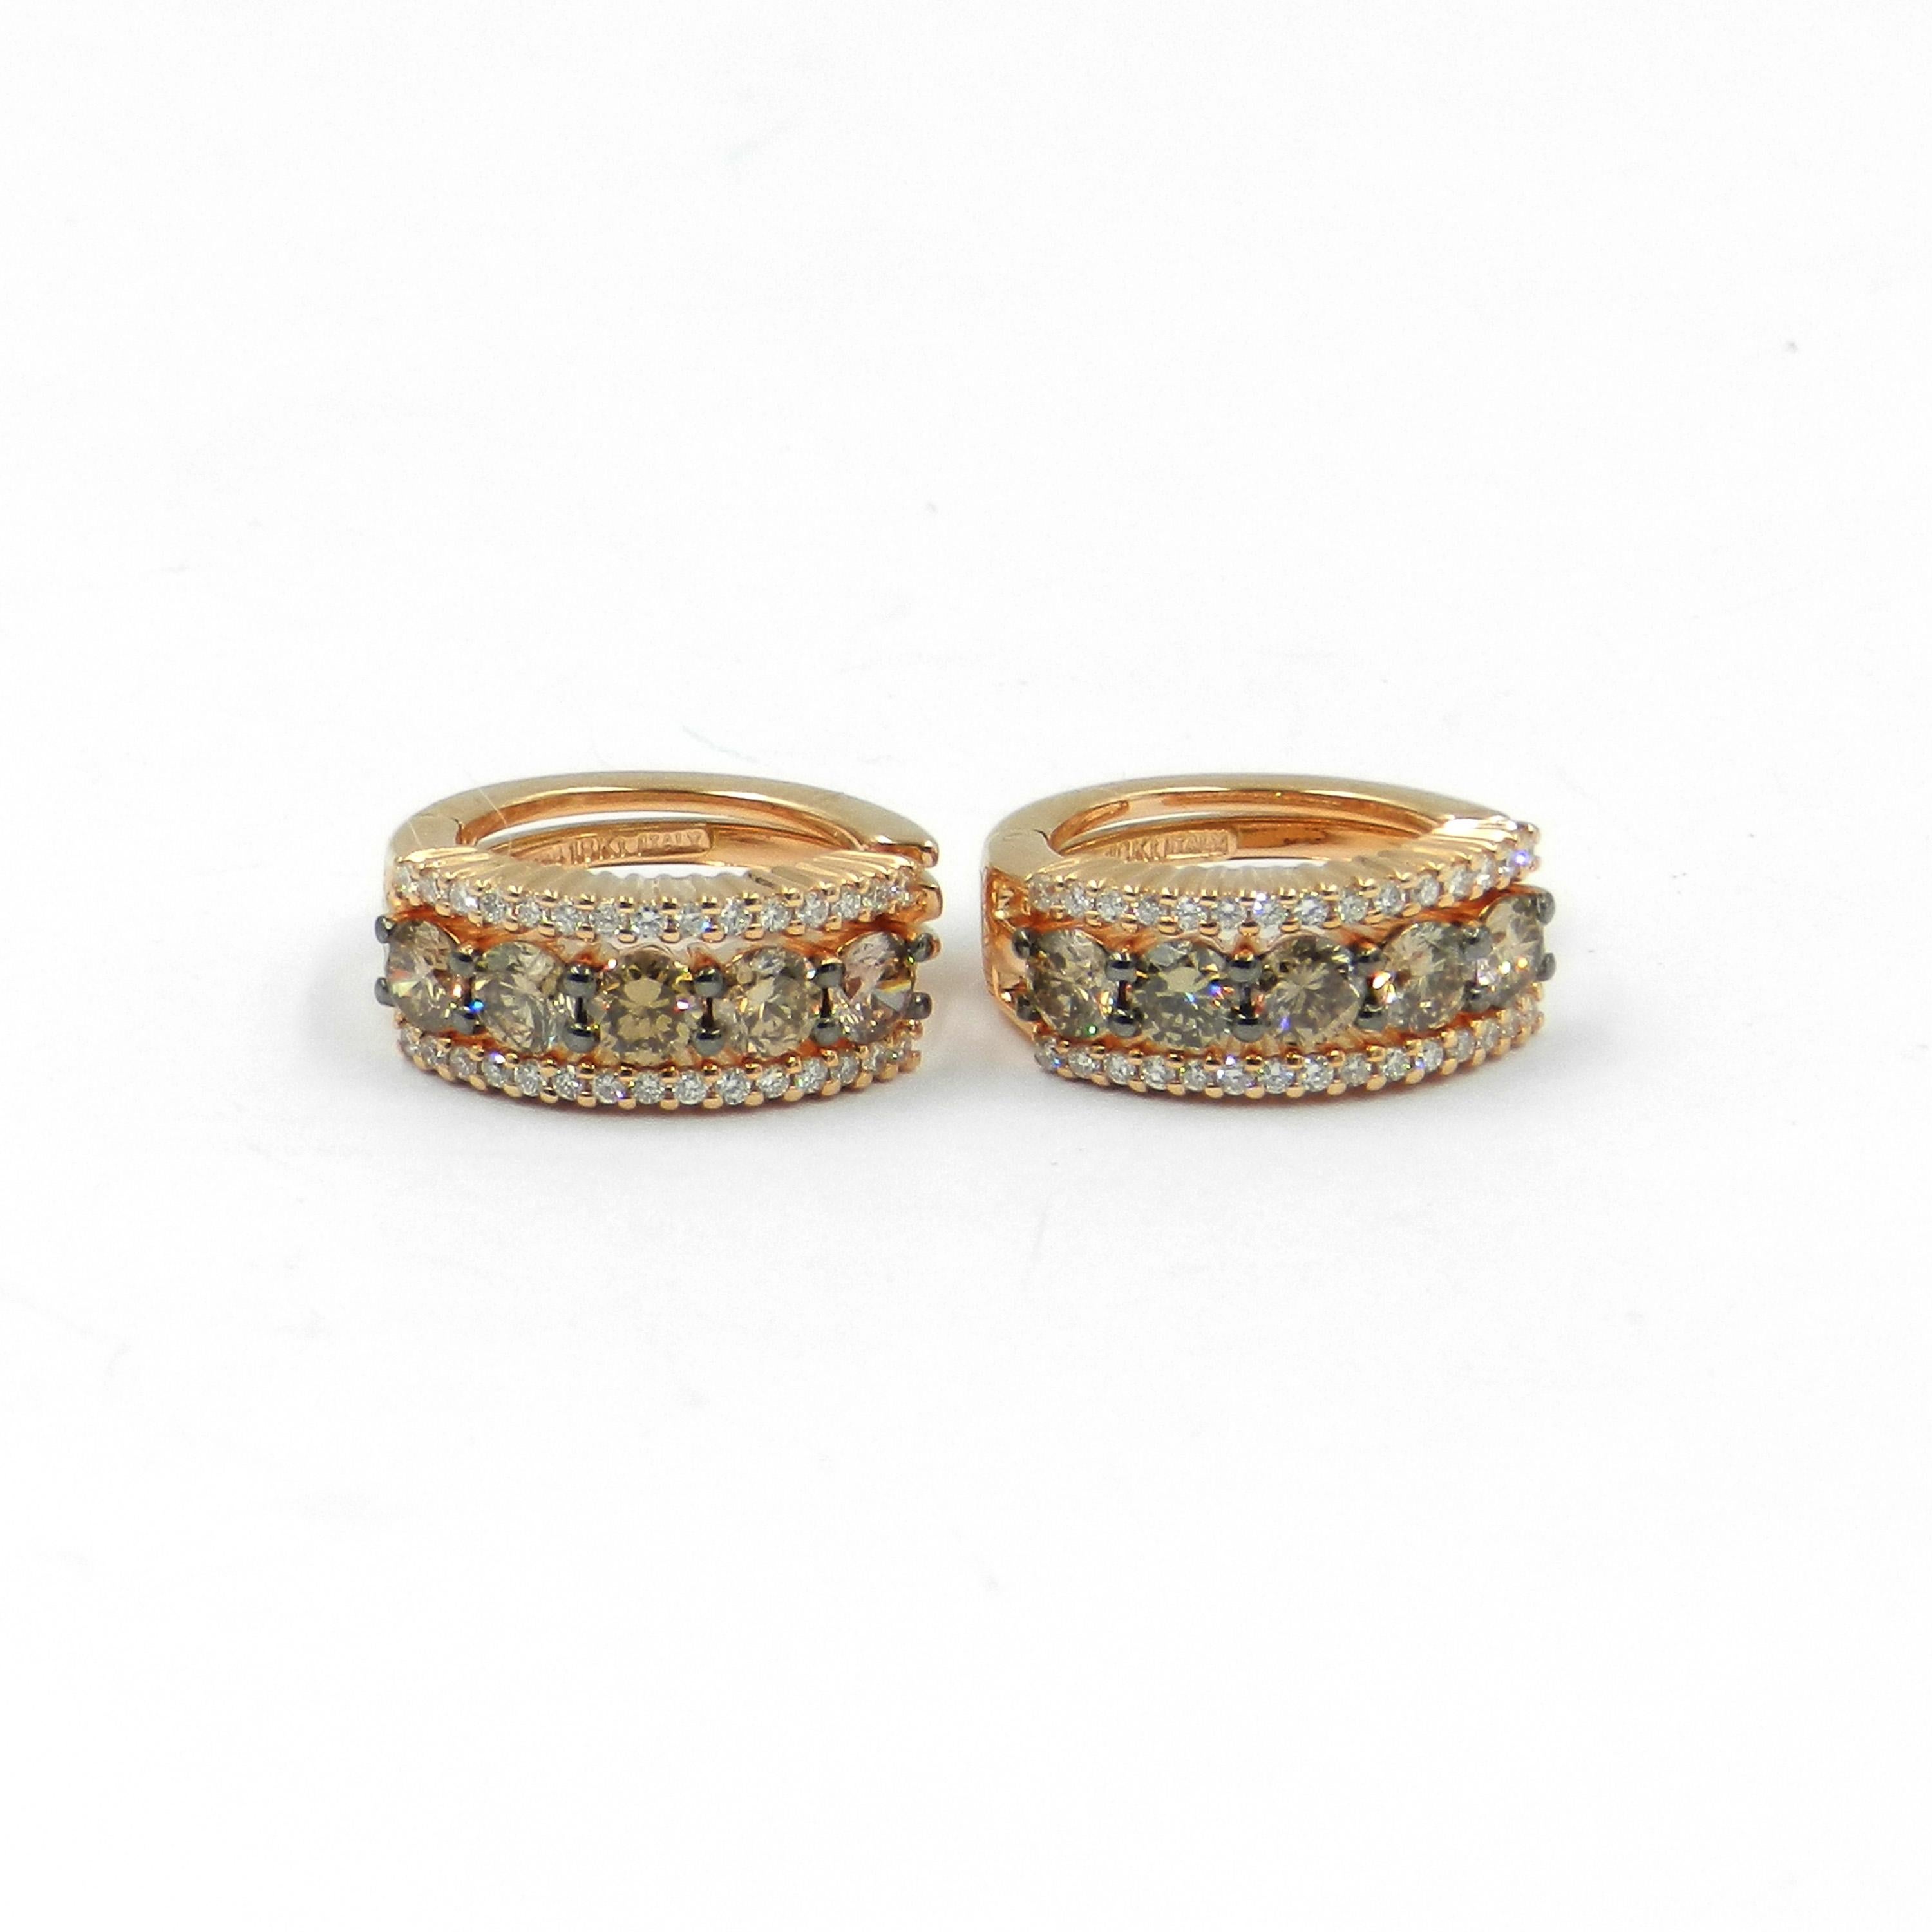 18KT Rose Gold Brown Diamonds and White DIAMONDS GARAVELLI HUGGIE EARRINGS
Prinicpessa Sofia collection features also matching ring, bracelet
External diameter 15mm internal diameter 10mm  thickness 7mm front side

18kt GOLD  : 9,40
BROWN DIAMONDS